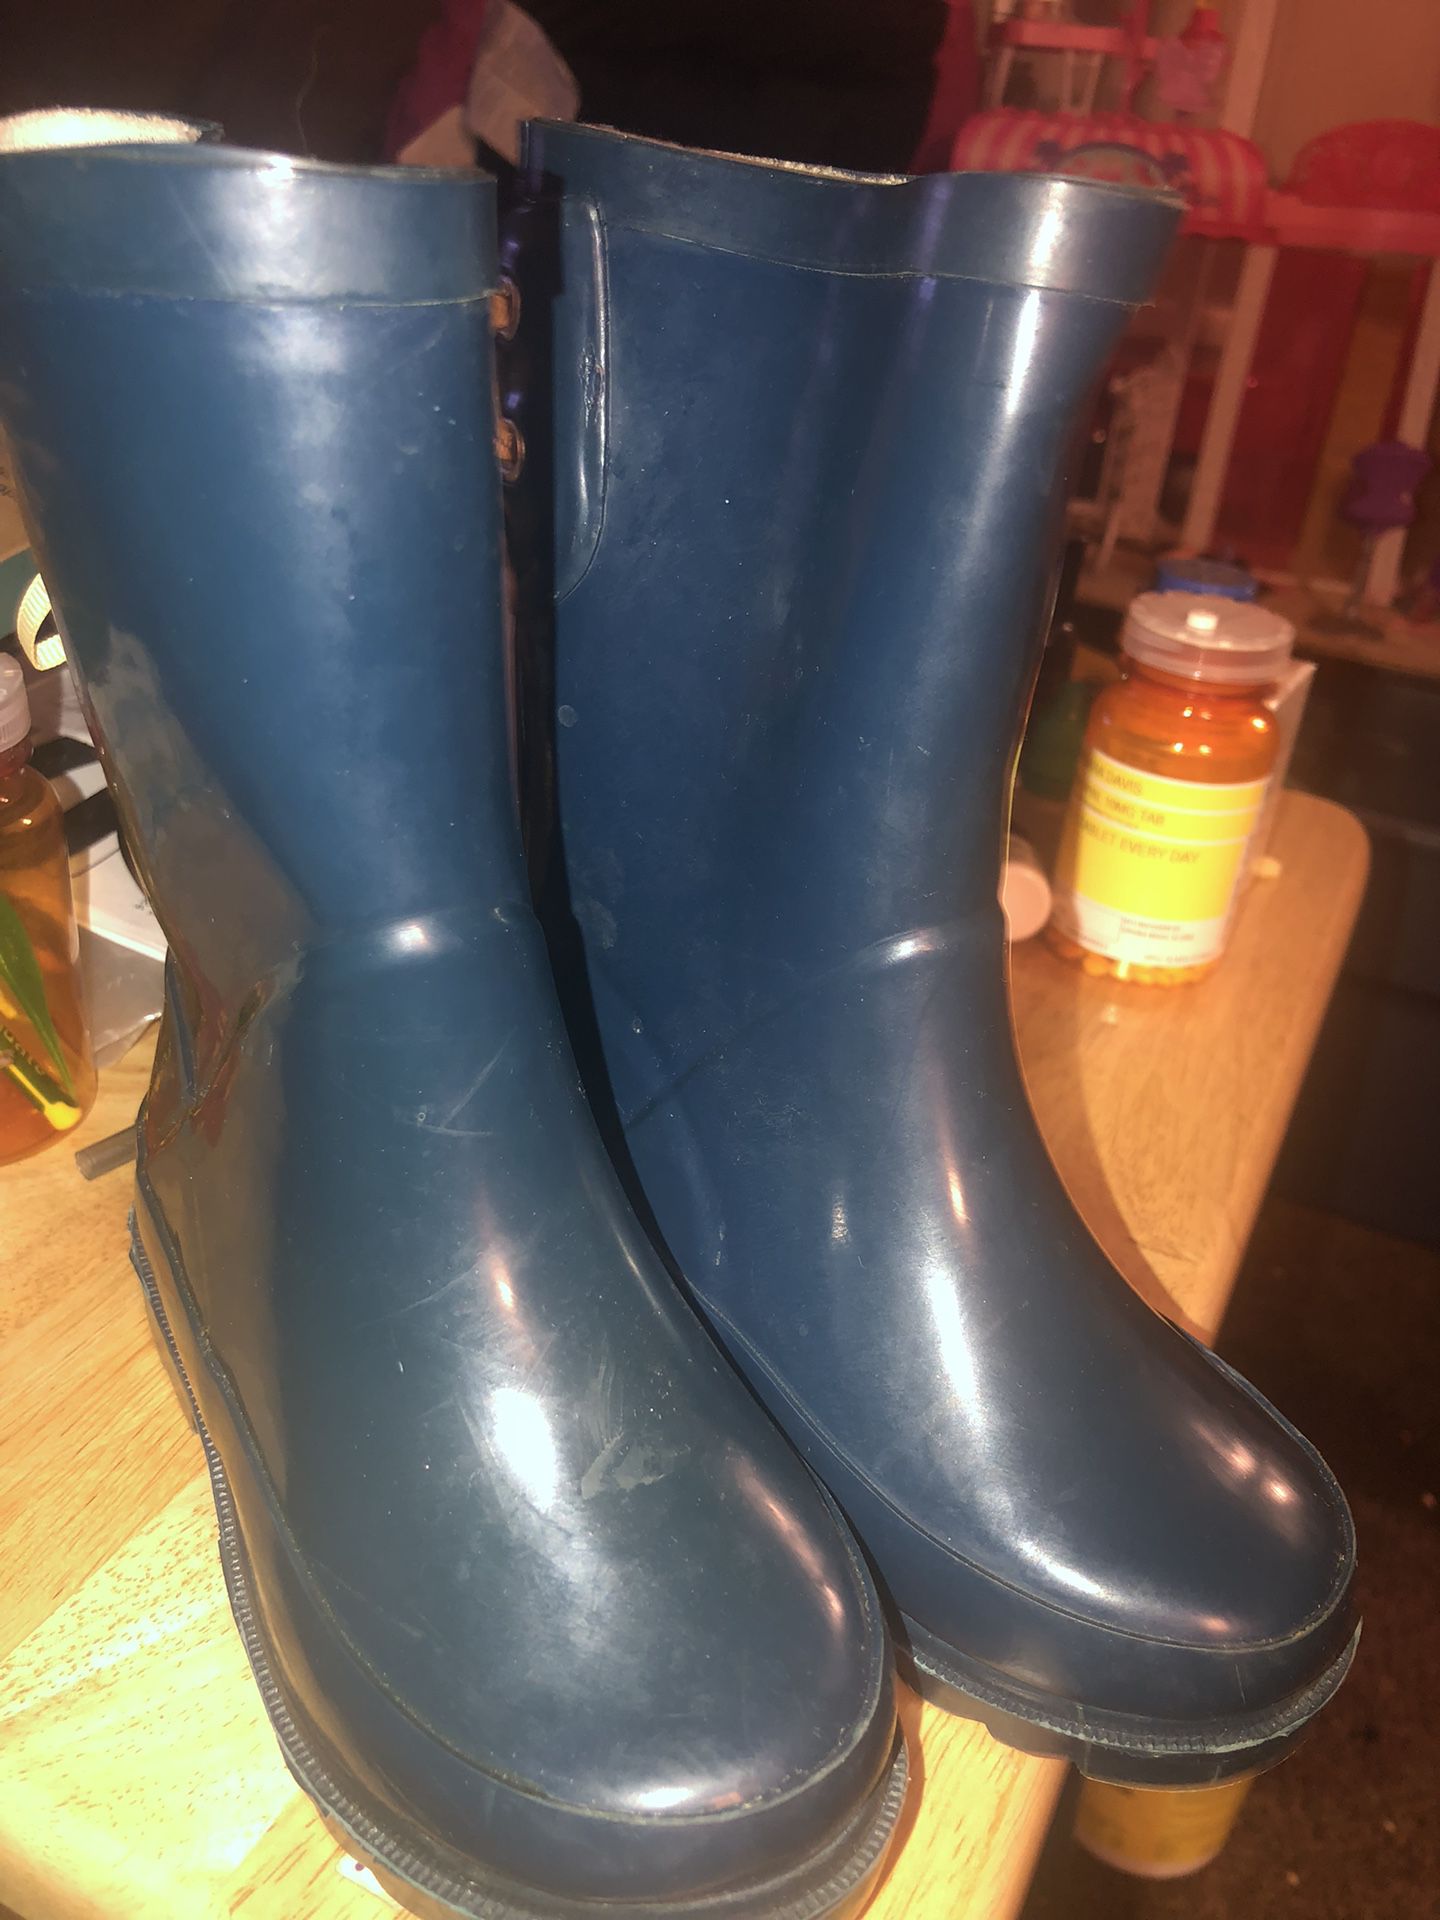 Western Chief Navy And Bows Rain Boots. Size 7/8C